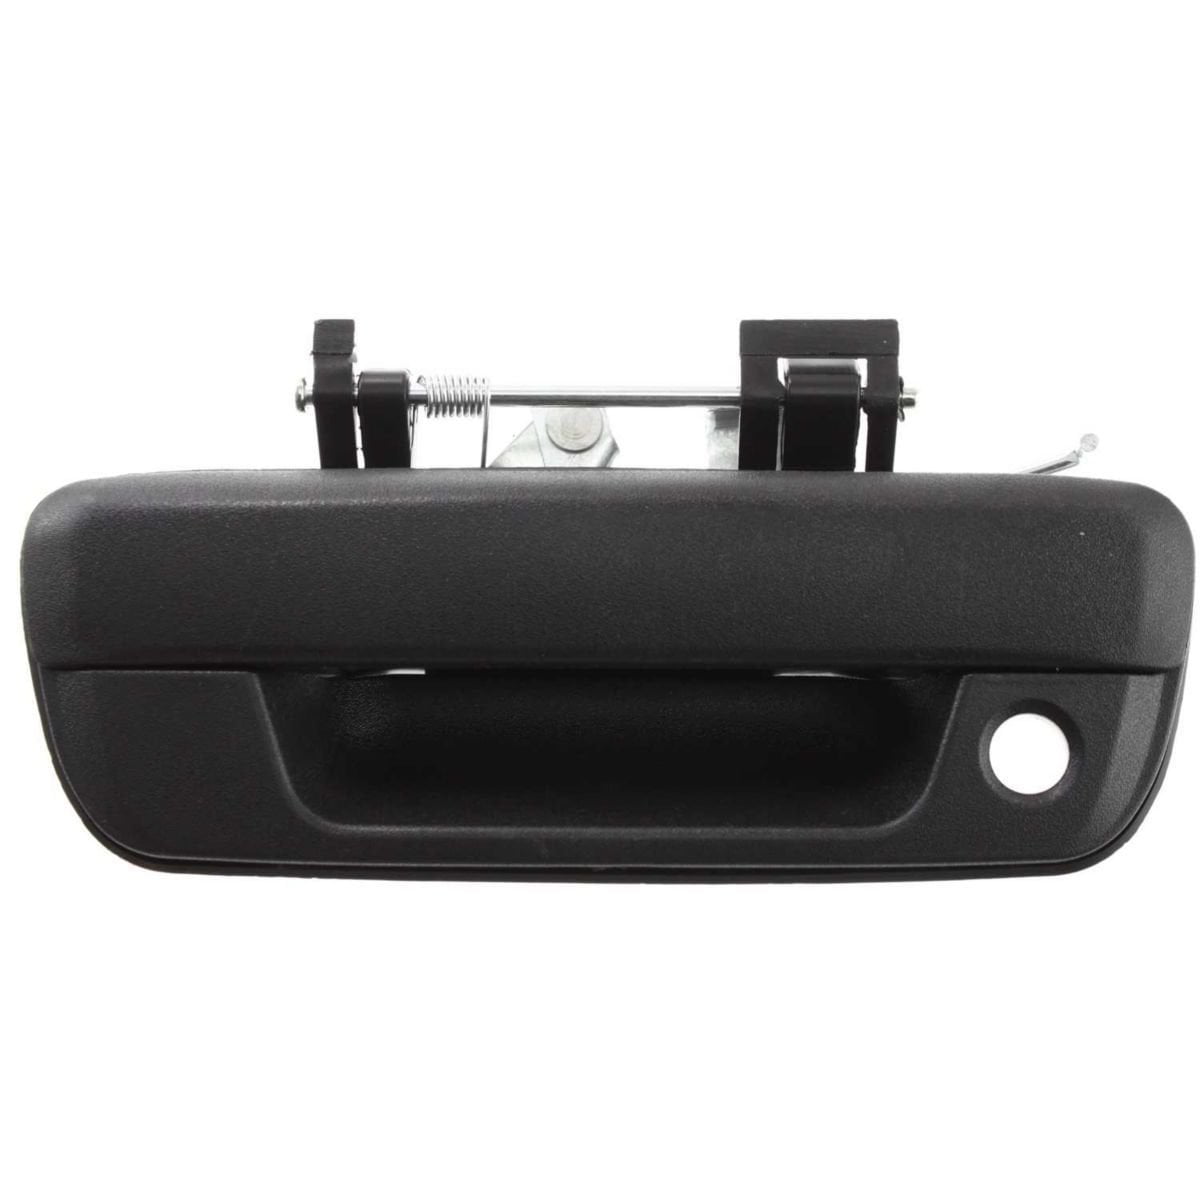 Diften 170-A0051-X01 New Tailgate Handle Outer Textured black Chevy i-370 GMC GM1915118 25801998